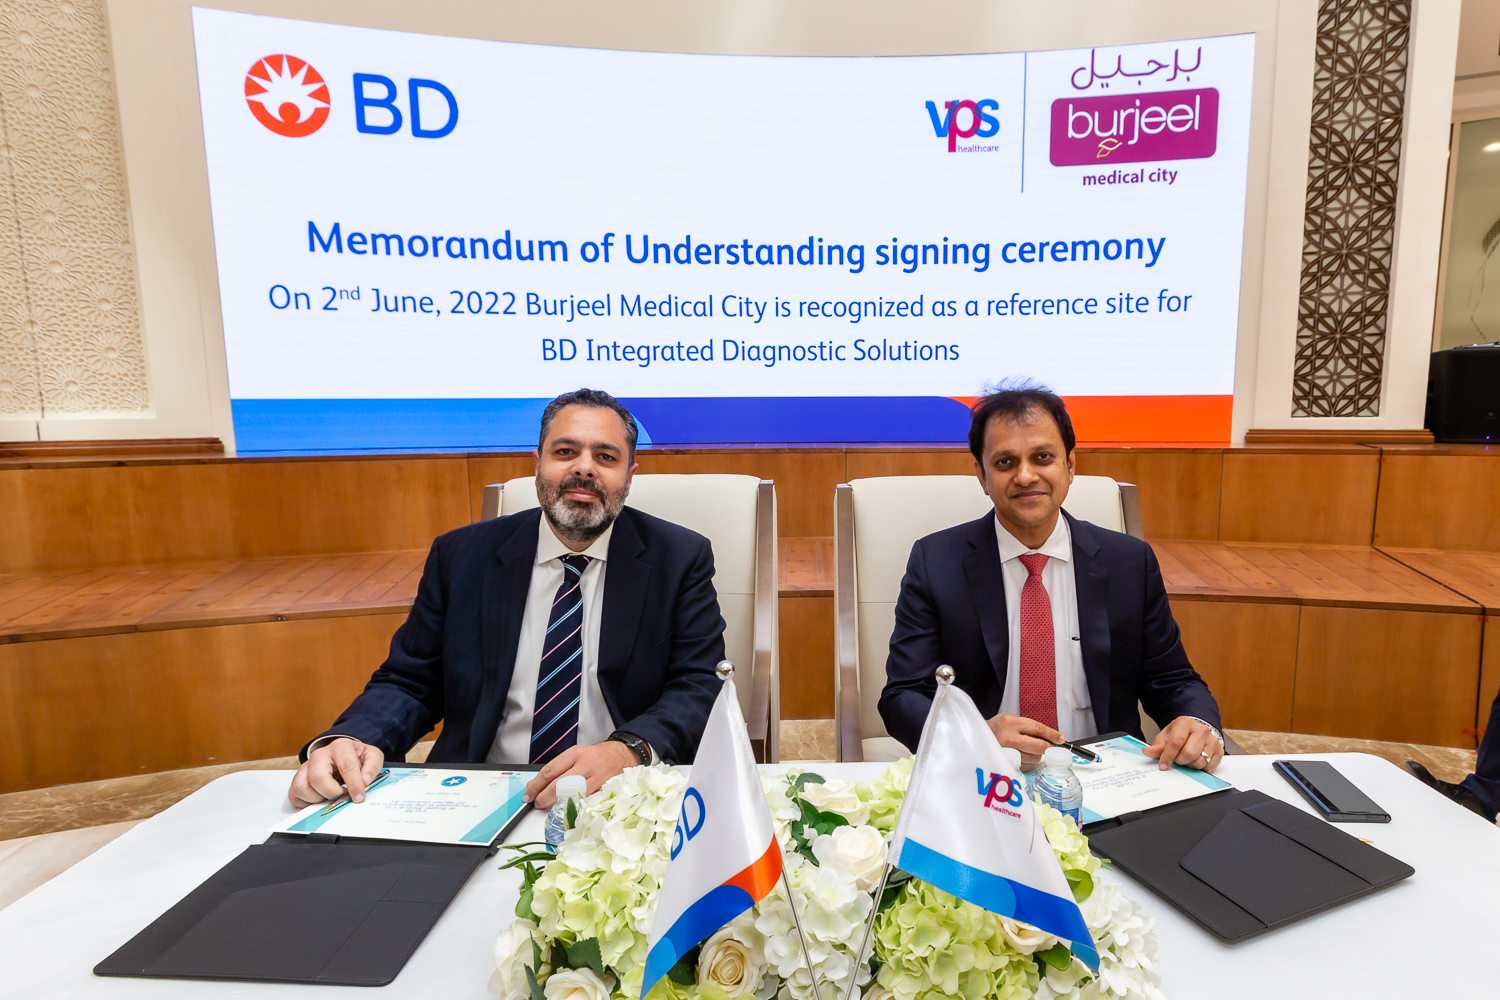 BD and Burjeel Medical City announce strategic partnership to drive healthcare innovation in the UAE